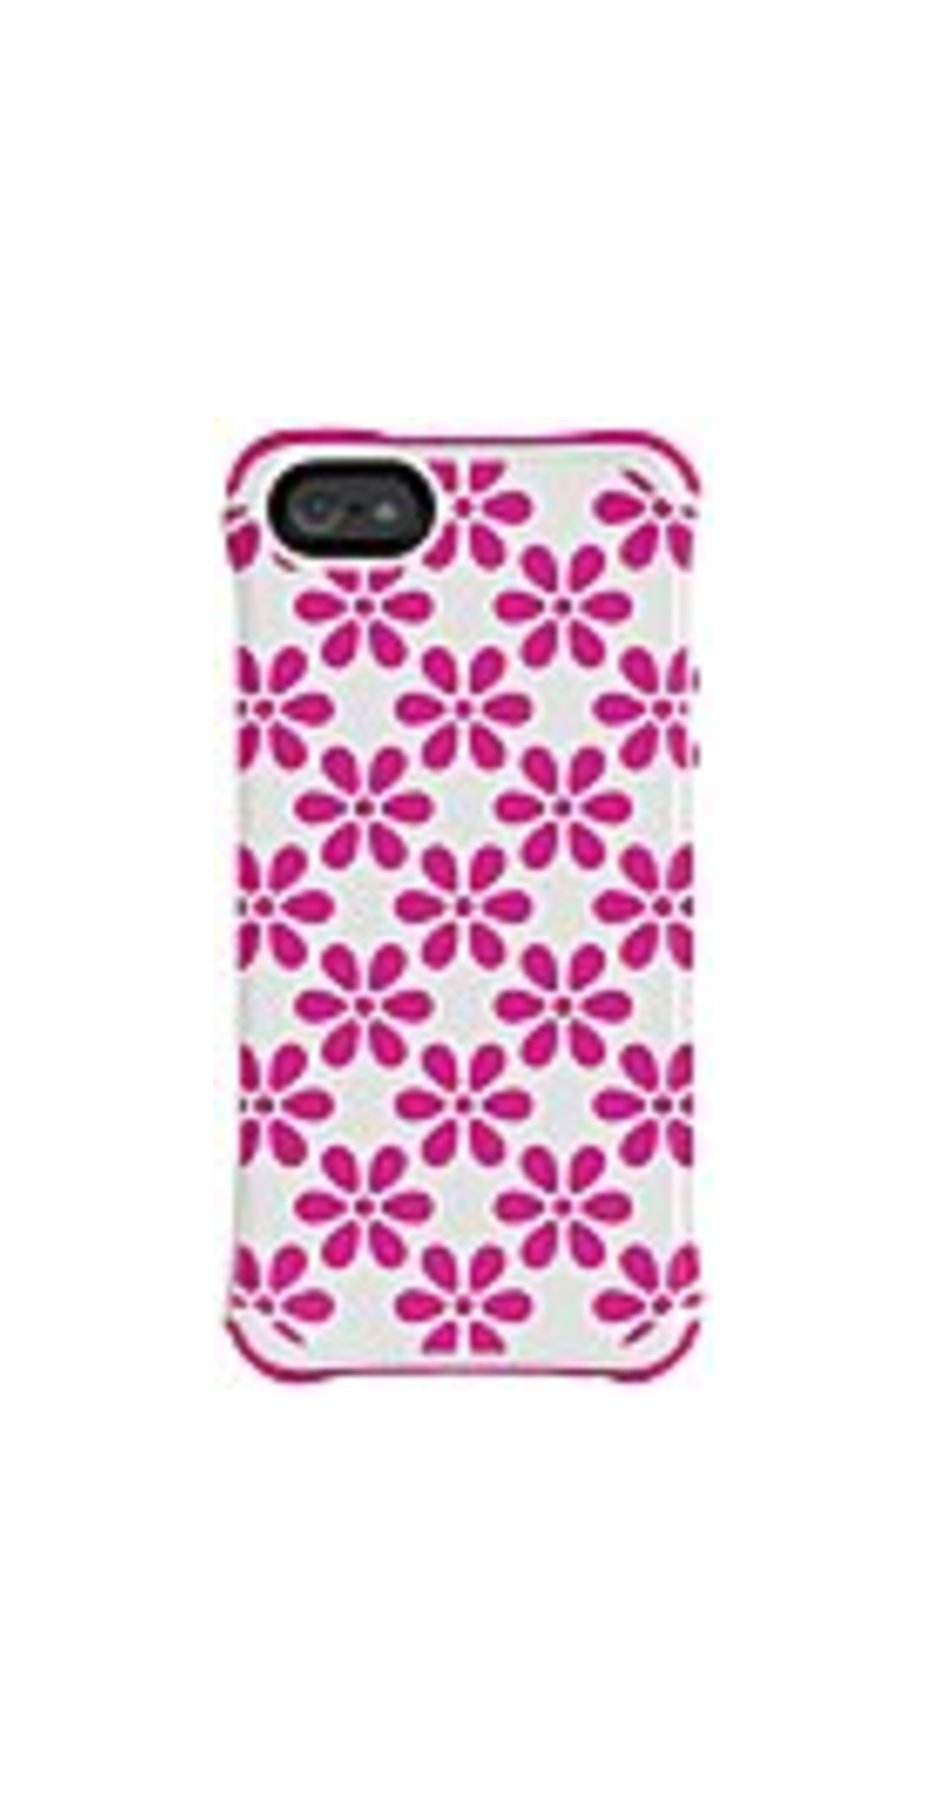 Ballistic iPhone 5 Aspira Series Case - For iPhone - Pink and White Flower - Rubberized - Shock Absorbing - Plastic, Thermoplastic Polyurethane (TPU)